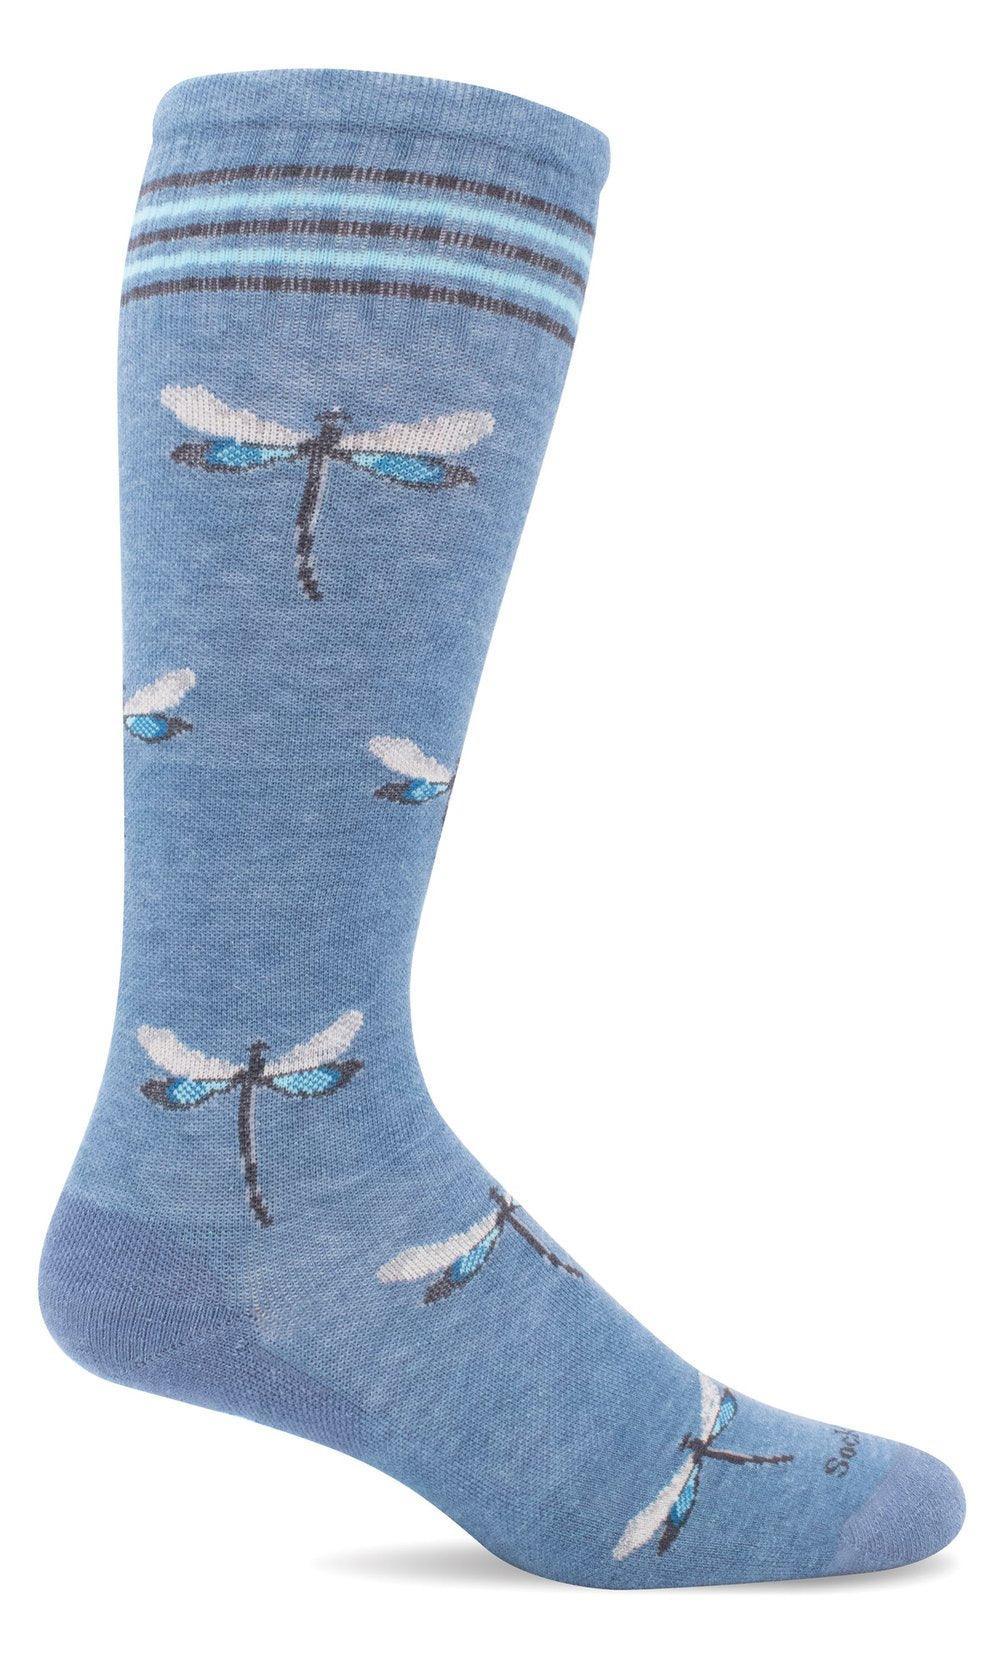 Women's Dragonfly | Moderate Graduated Compression Socks - Sockwell - The Sock Monster